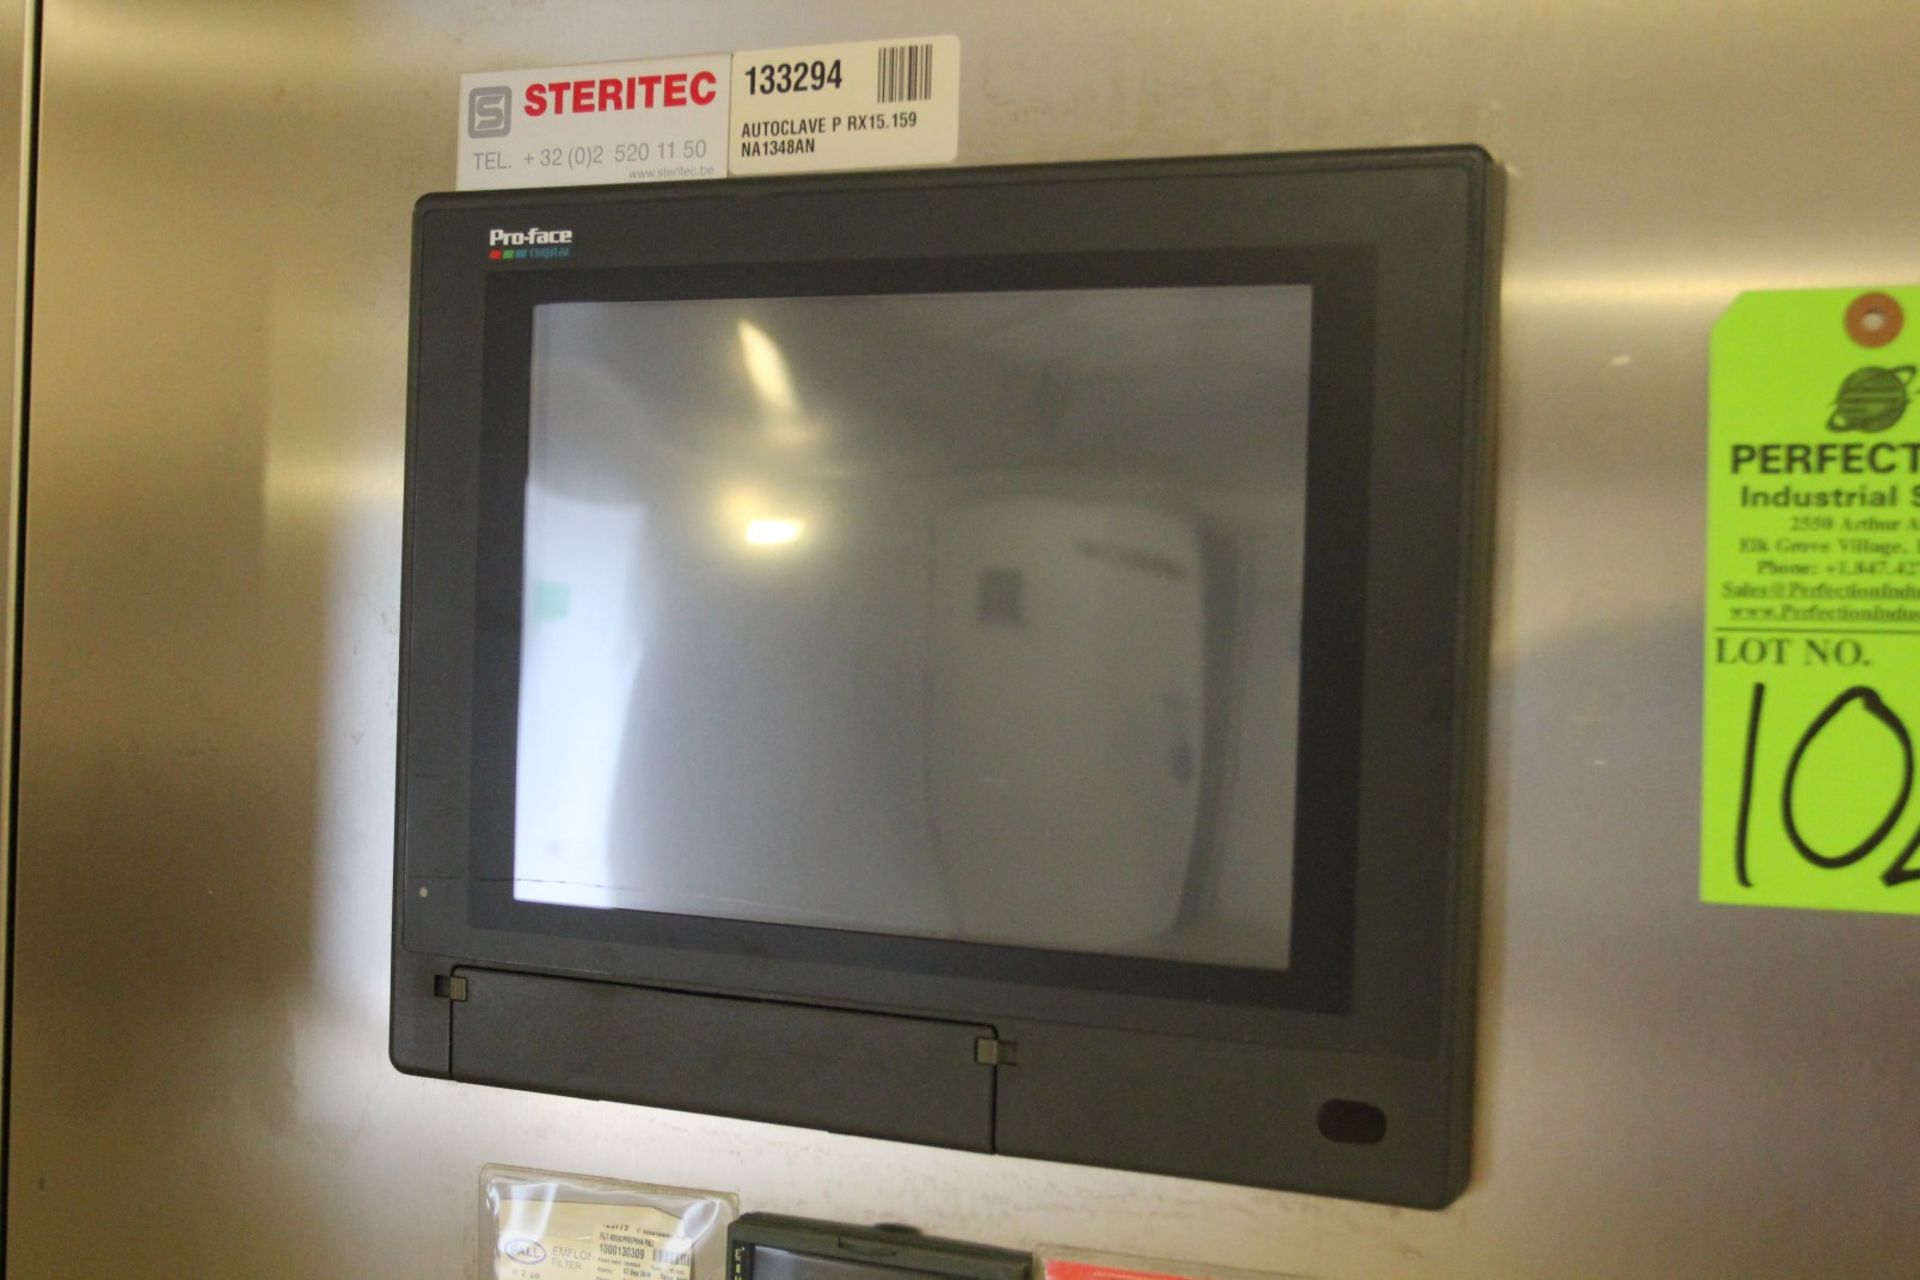 2005 Federgari RX15.159 Double Door Autoclave Saturated Steam Sterilizer, s/n NA1348N, ProFace - Image 4 of 5